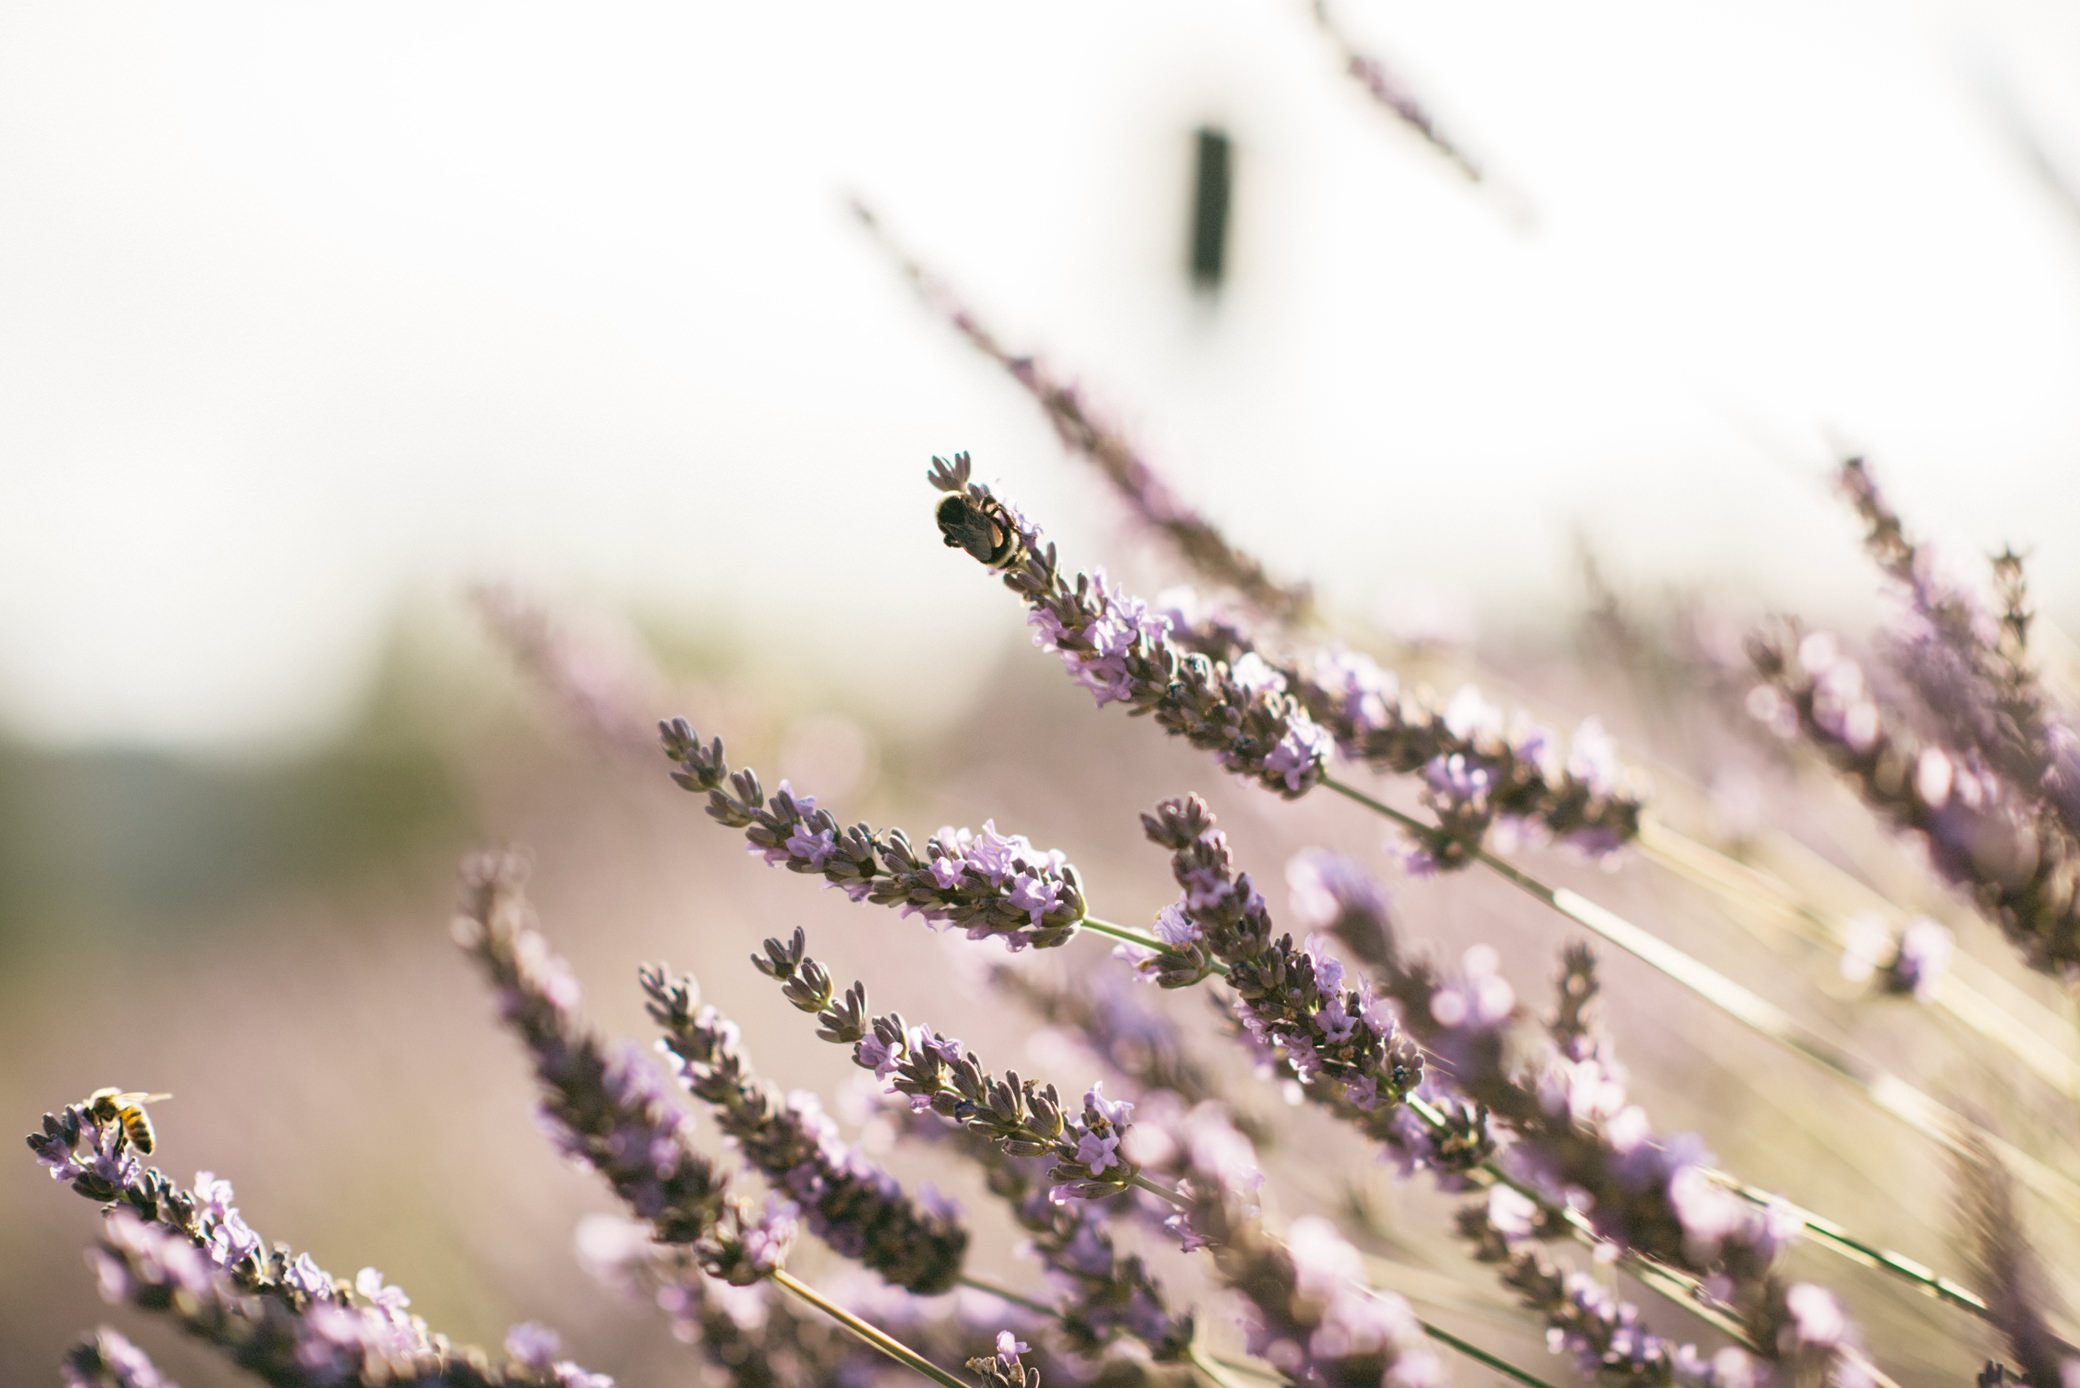 Honey bees do their thing at the Woodinville Lavender Farm, Summer 2016, Washington